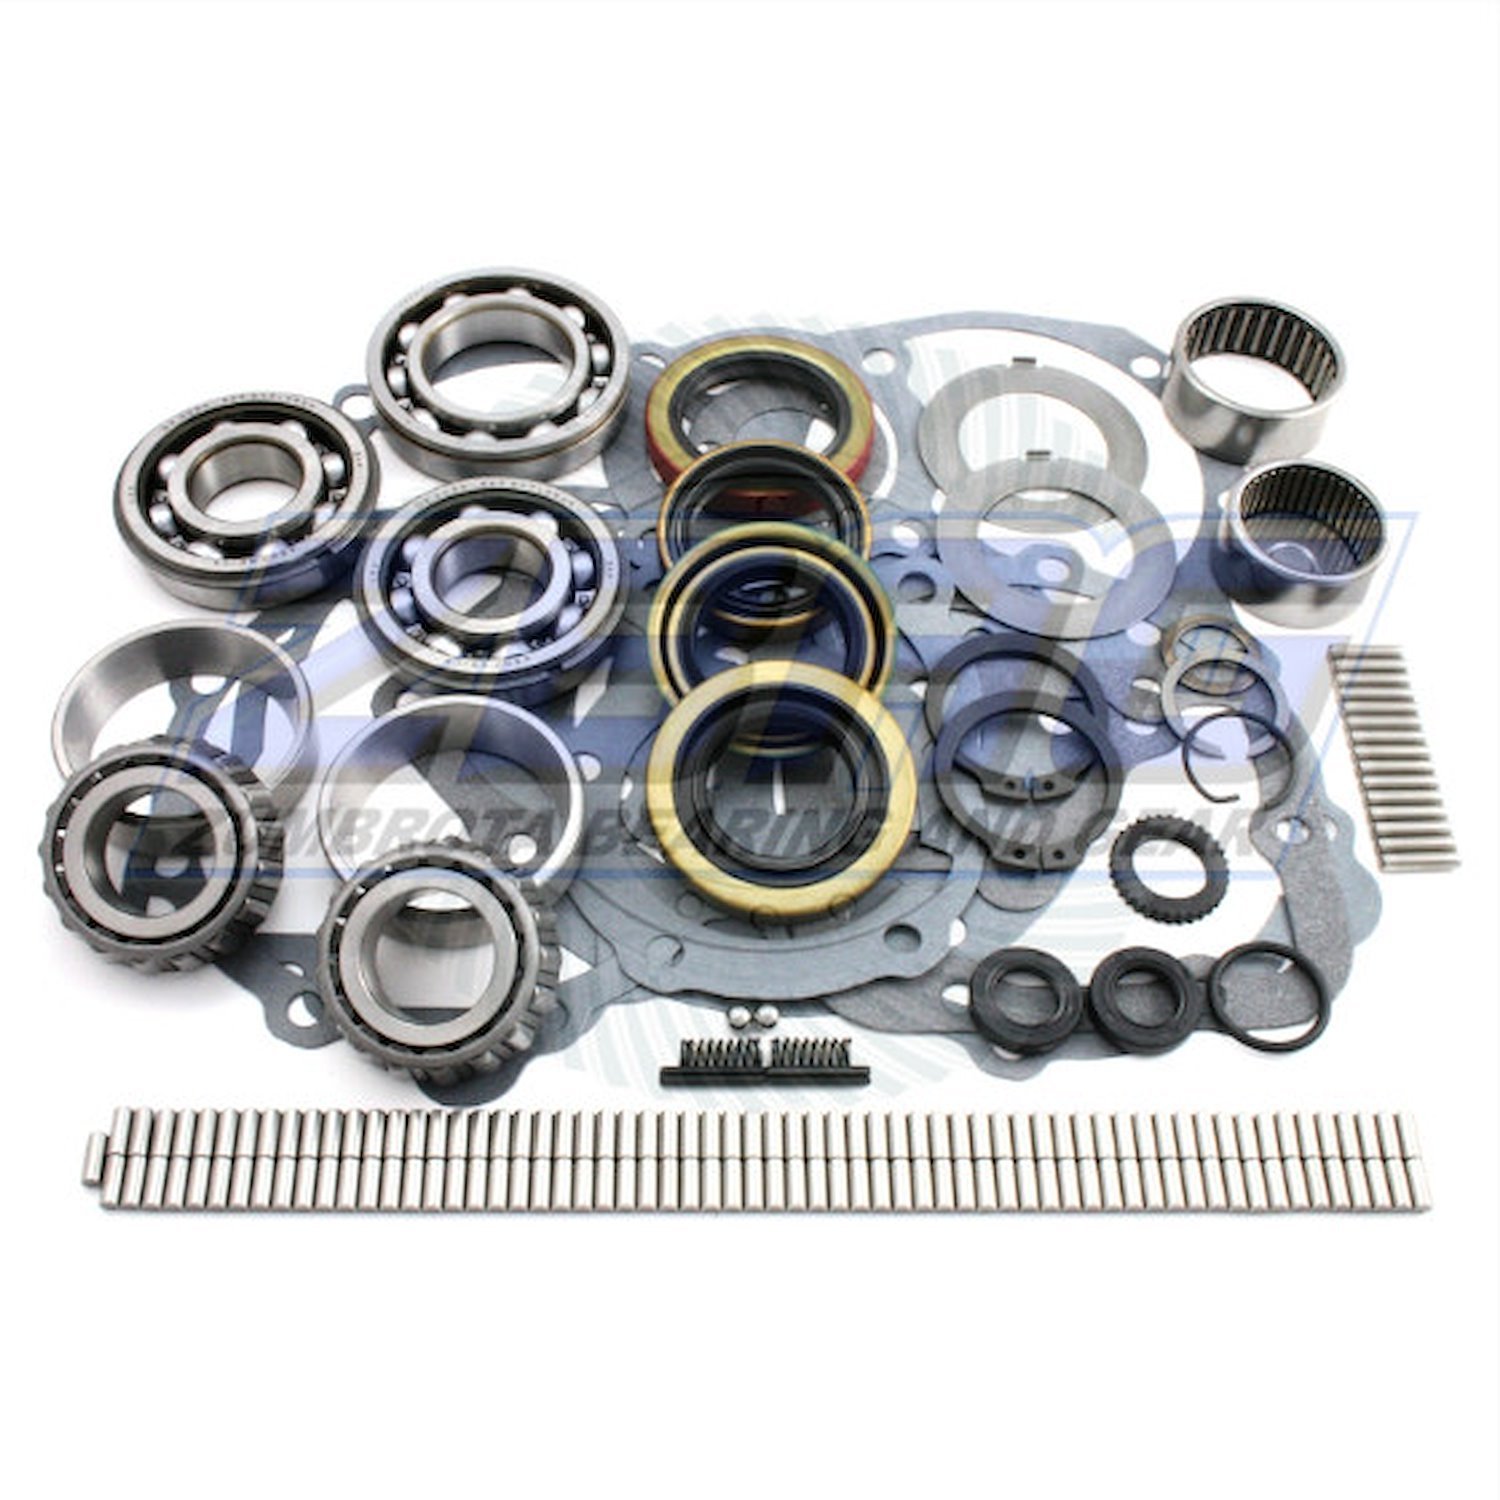 USA Standard 79317 Transfer Case Np205 Bearing Kit 1970-1986 GM With Th400 Lsm465